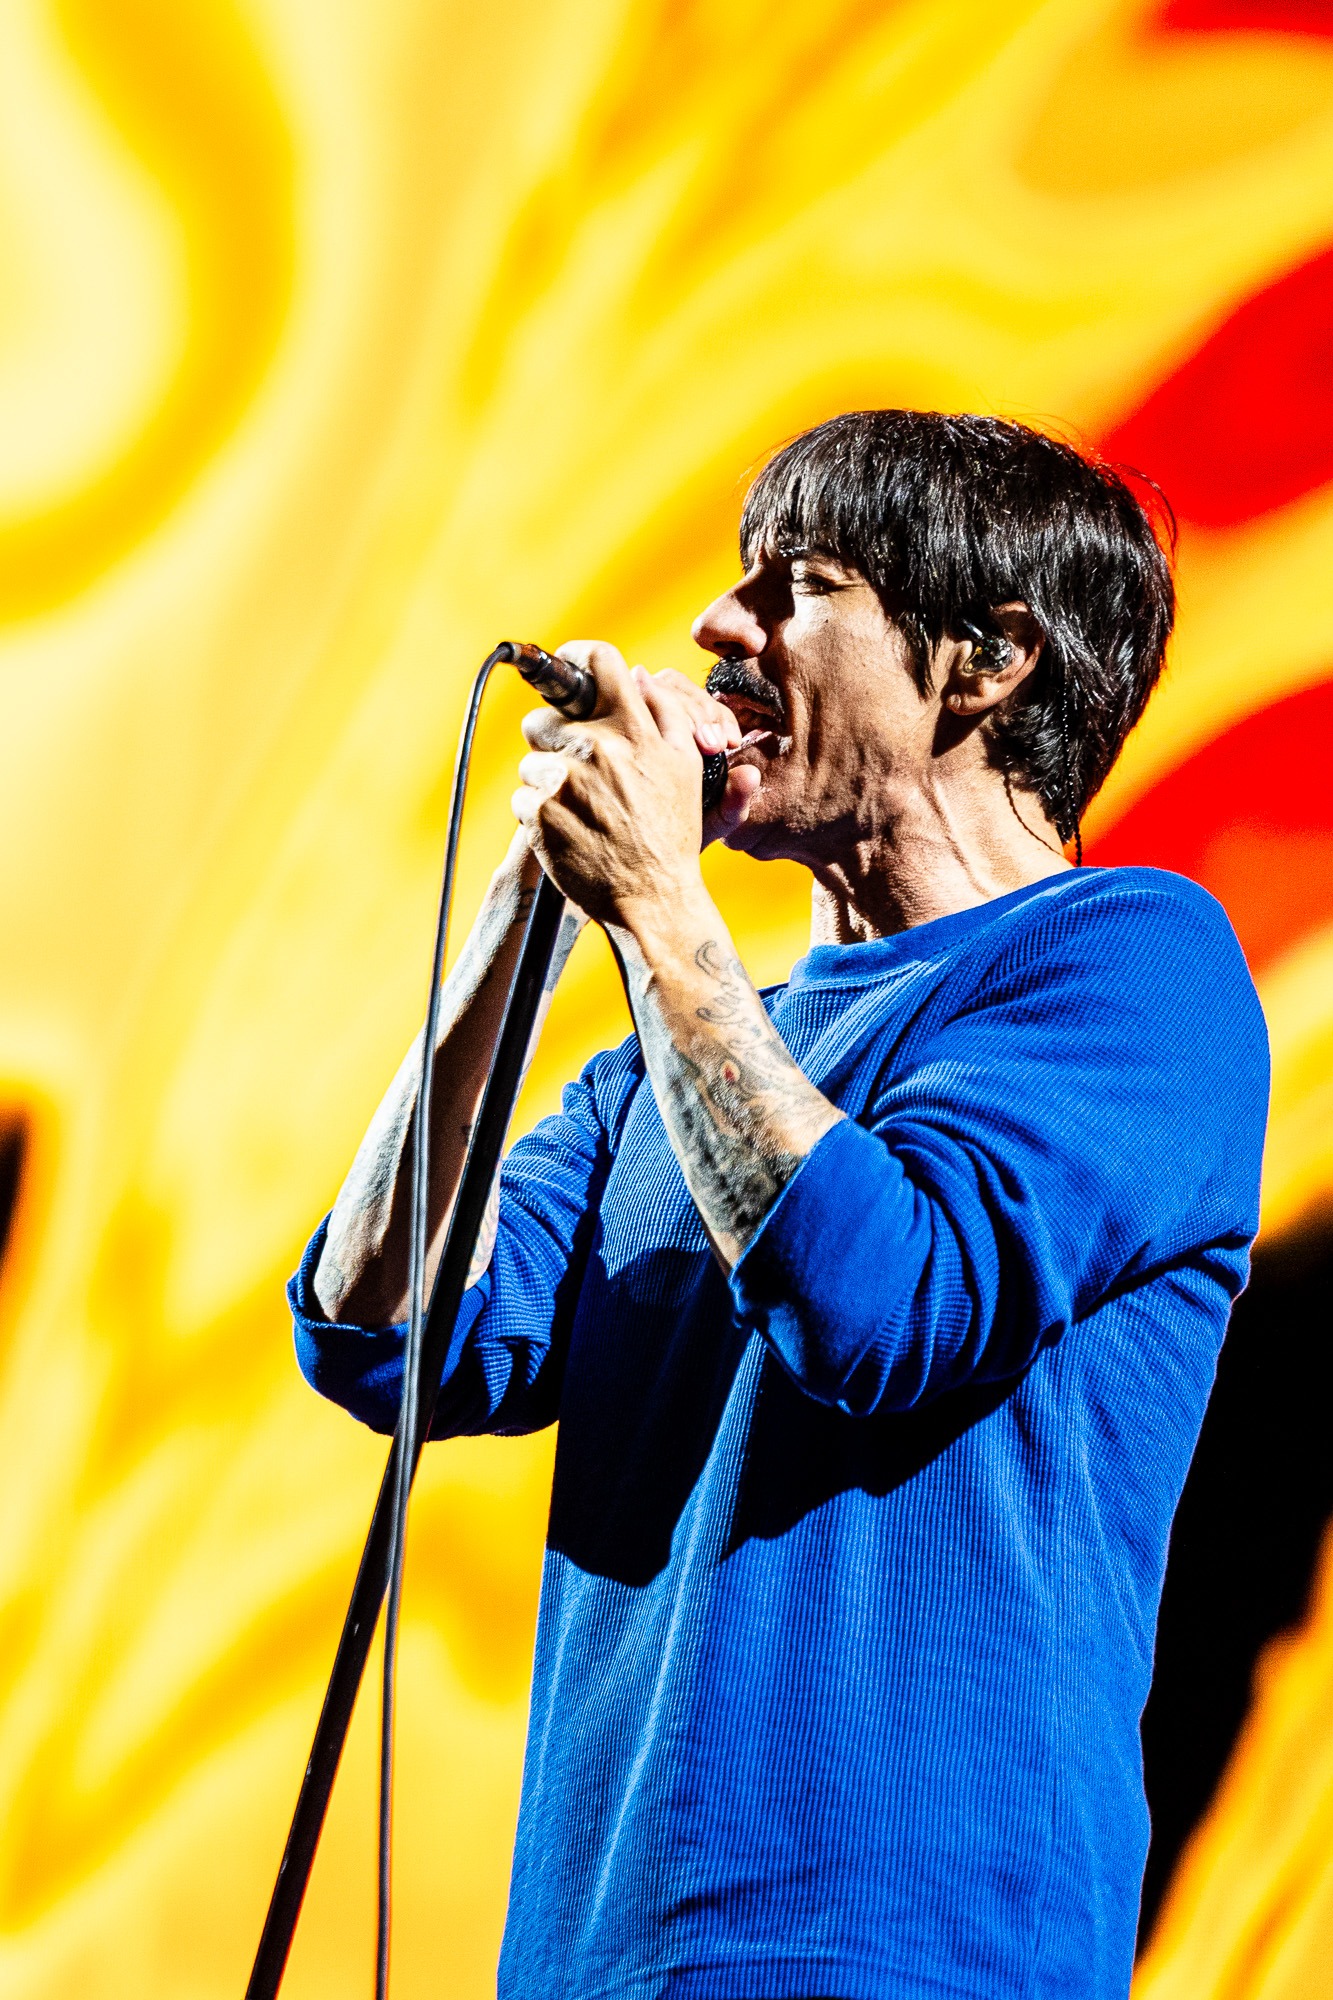 Anthony Kiedis of Red Hot Chili Peppers singing